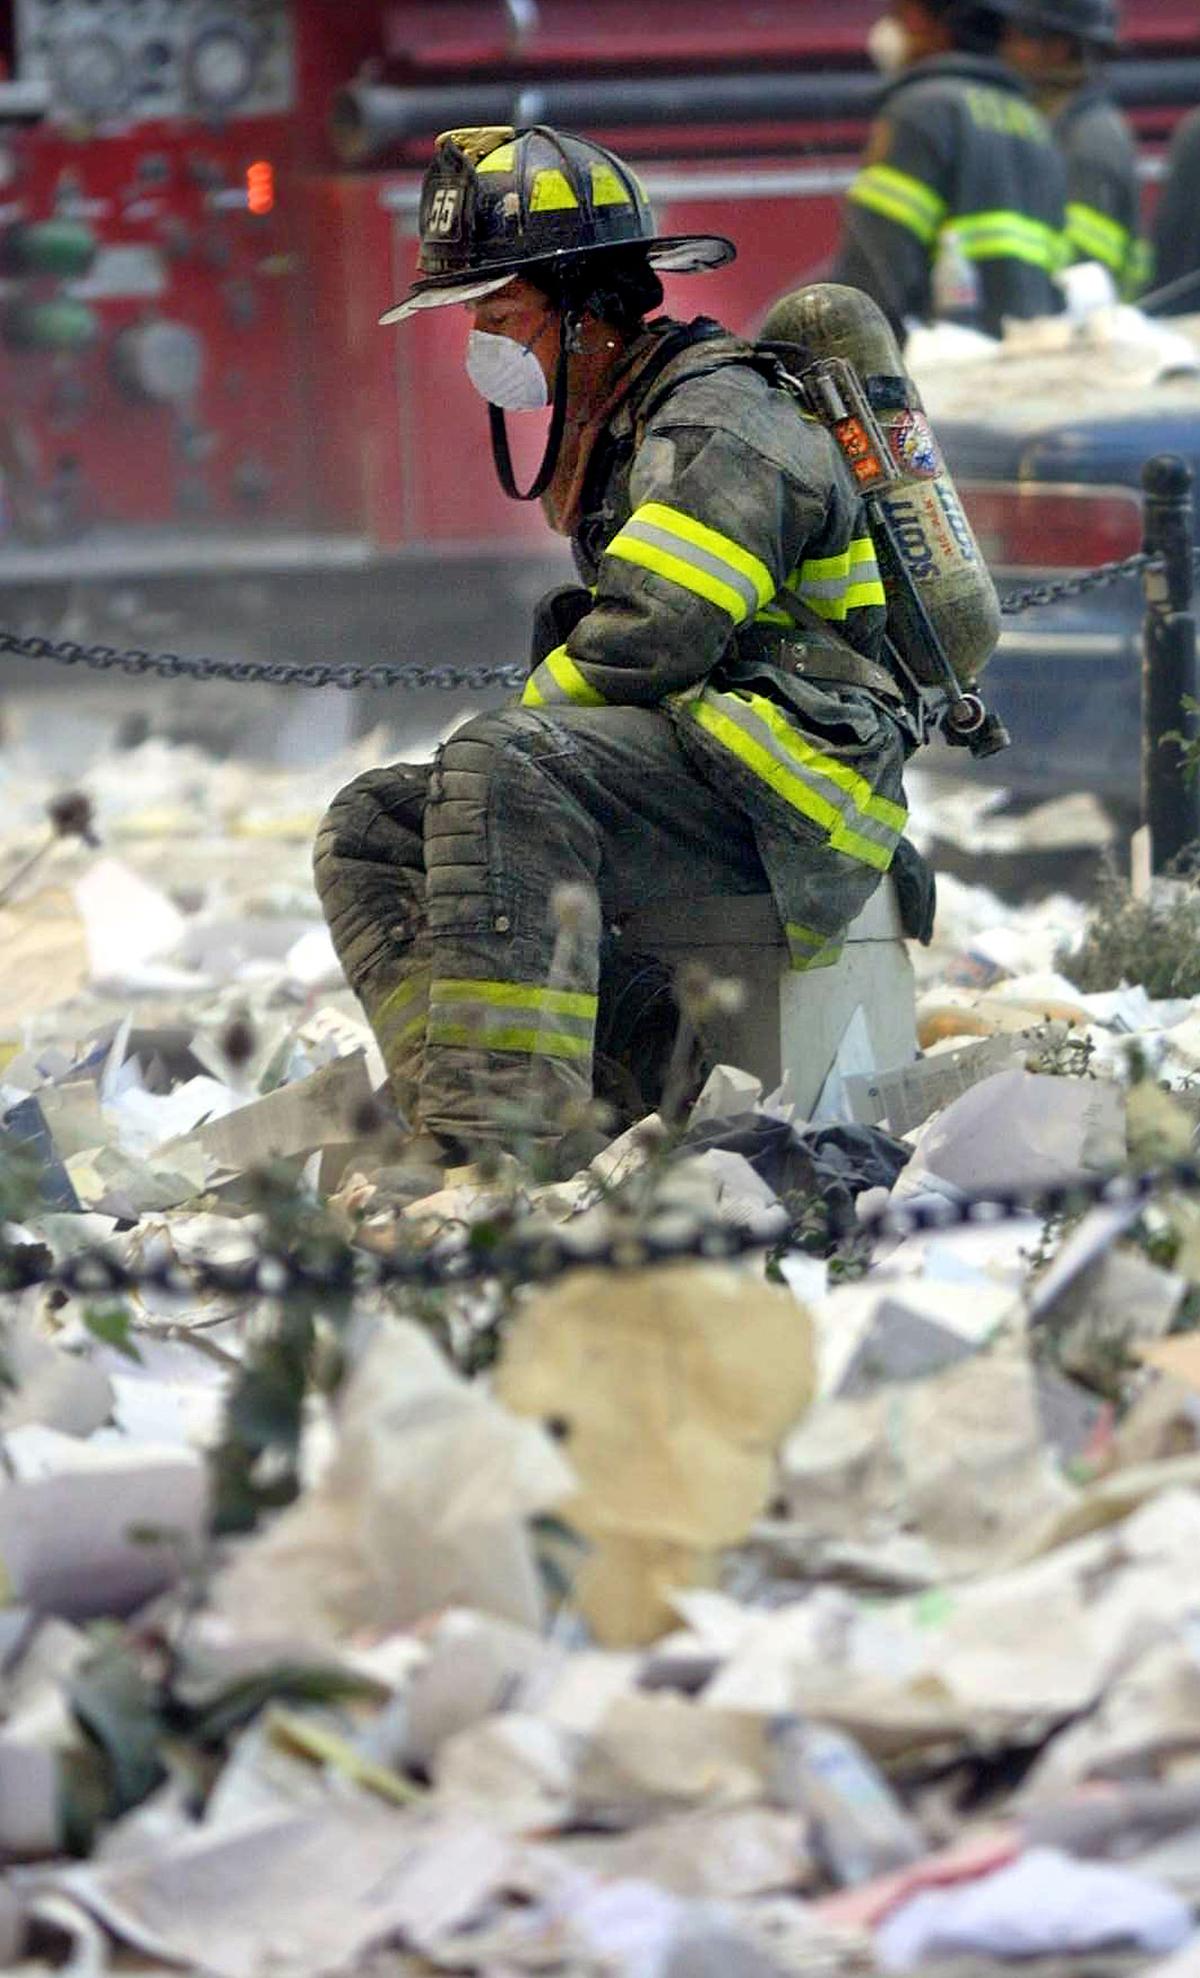 A firefighter rests in the area where the World Trade Center buildings collapsed on Sept. 11, 2001 after two airplanes slammed into the twin towers in a terrorist attack. (Mario Tama/Getty Images)